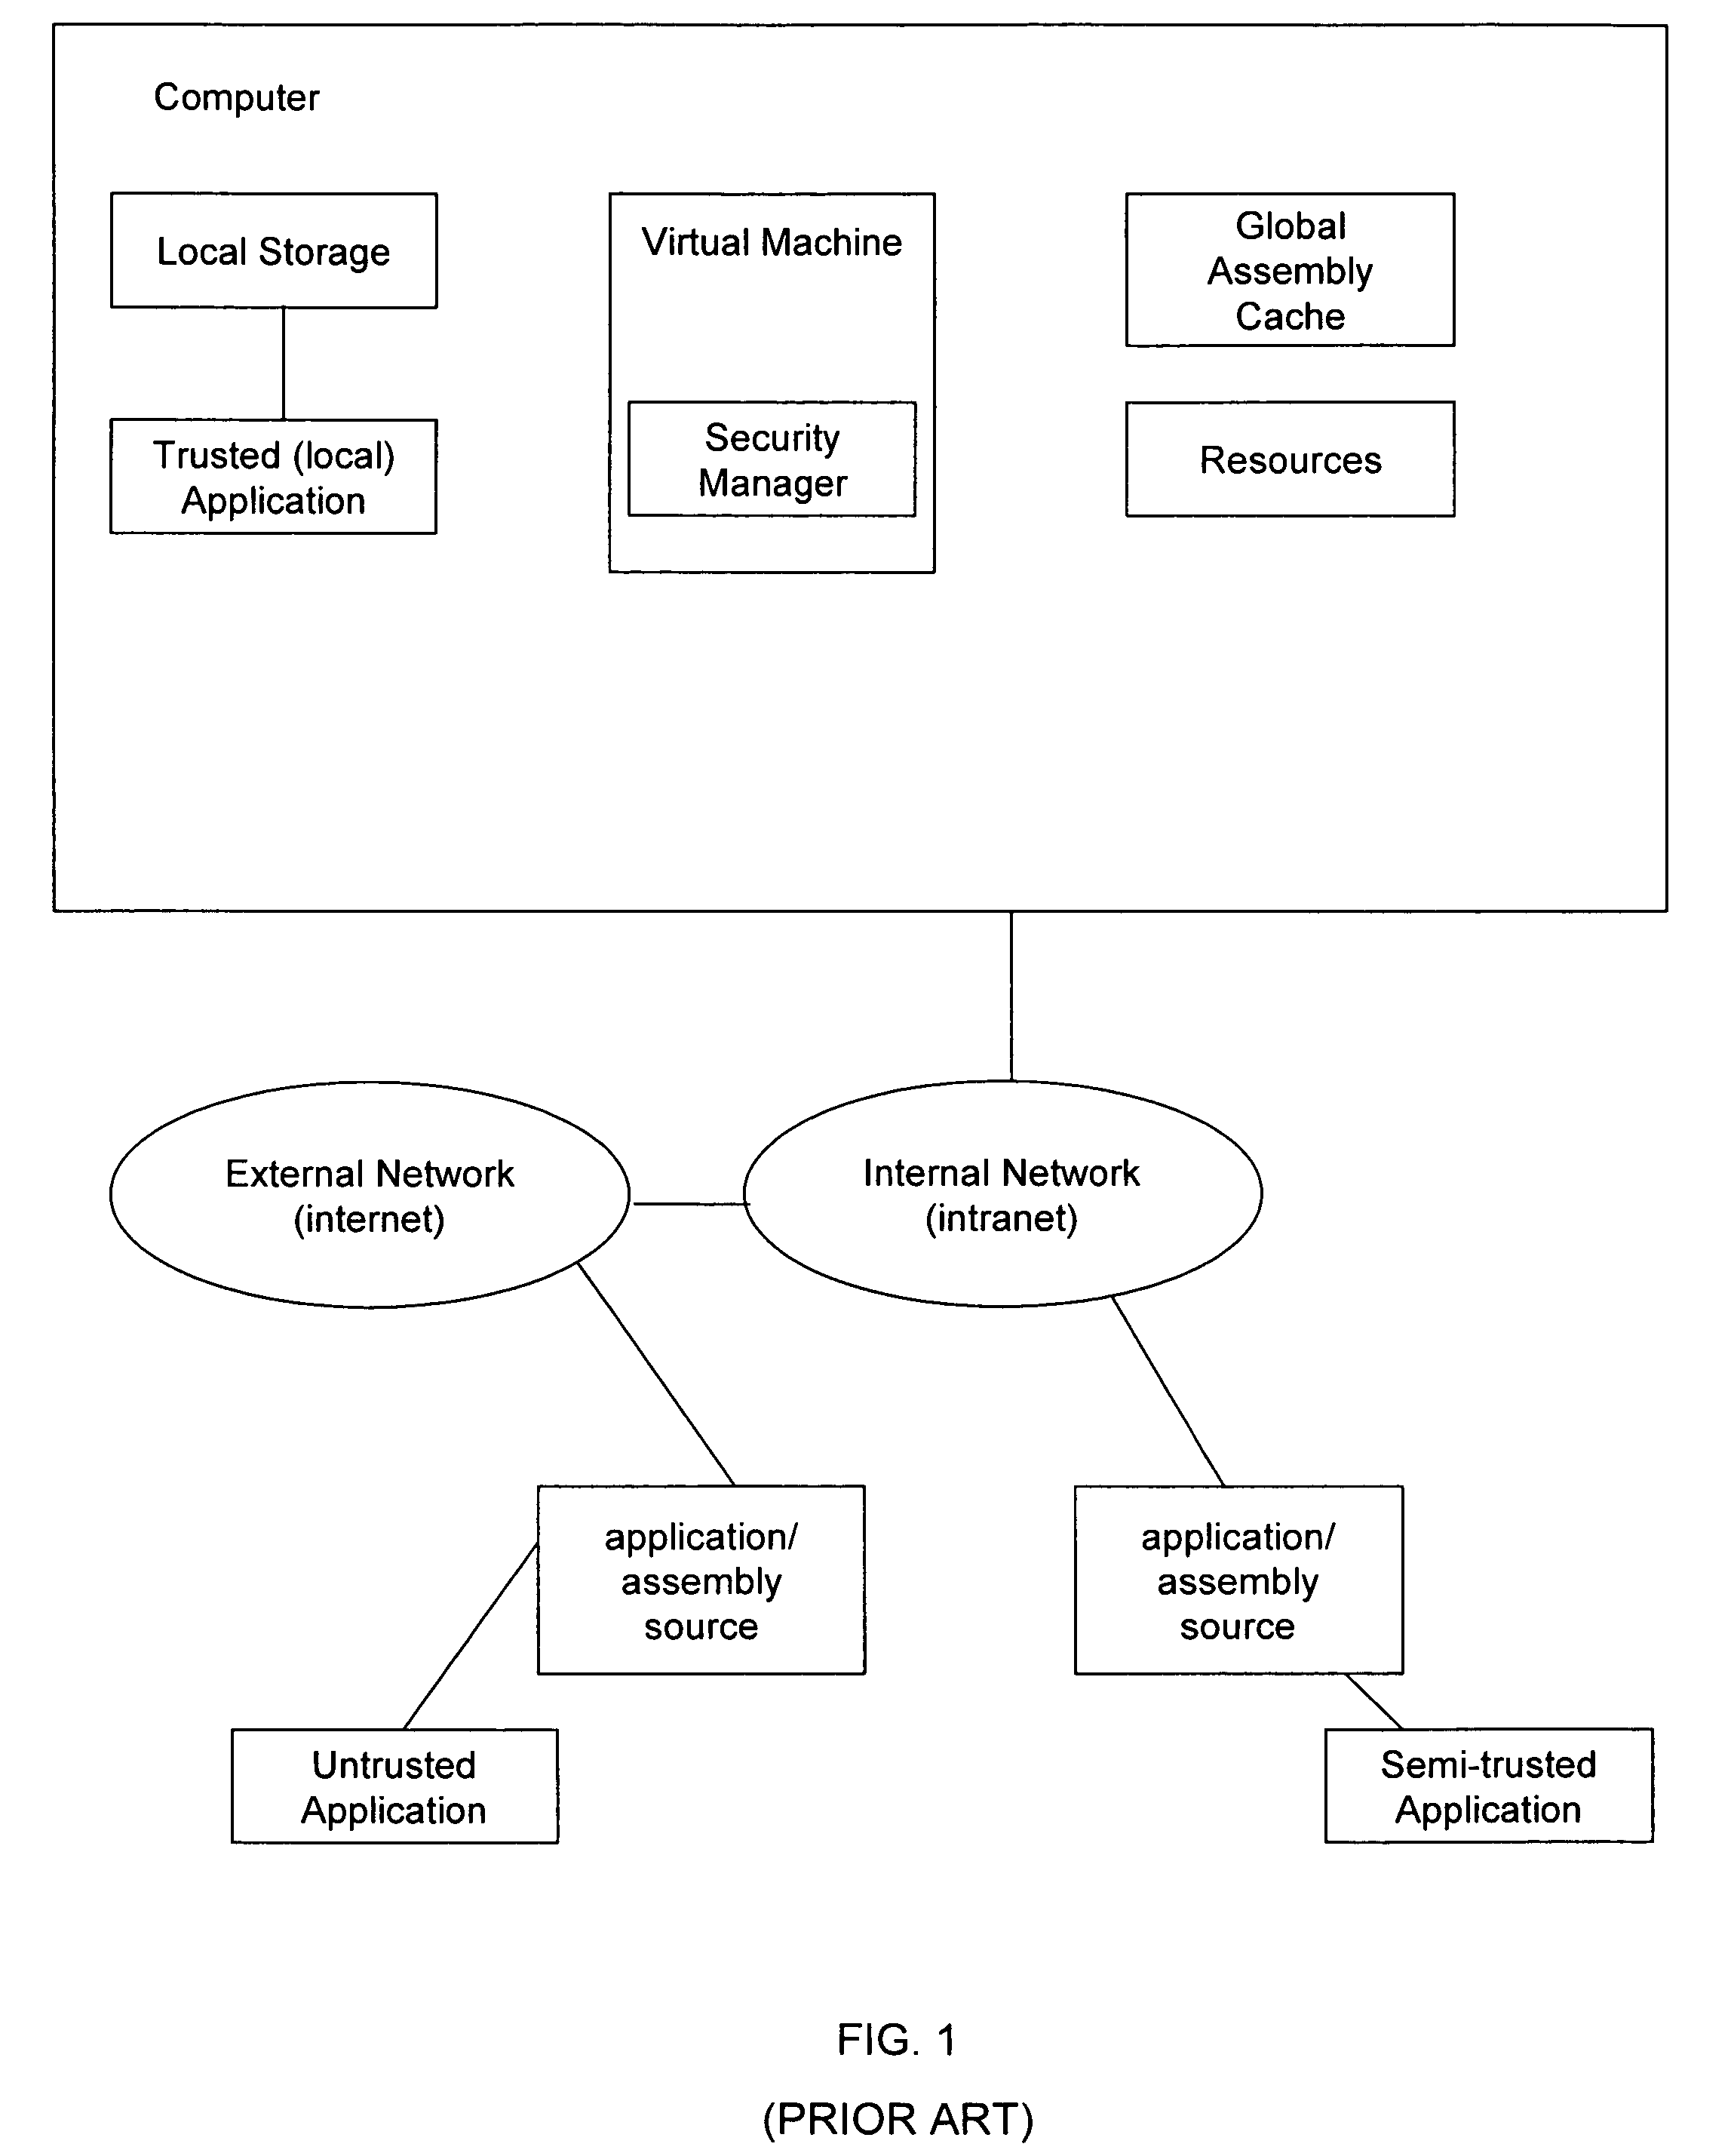 System and method for applying security policies on multiple assembly caches